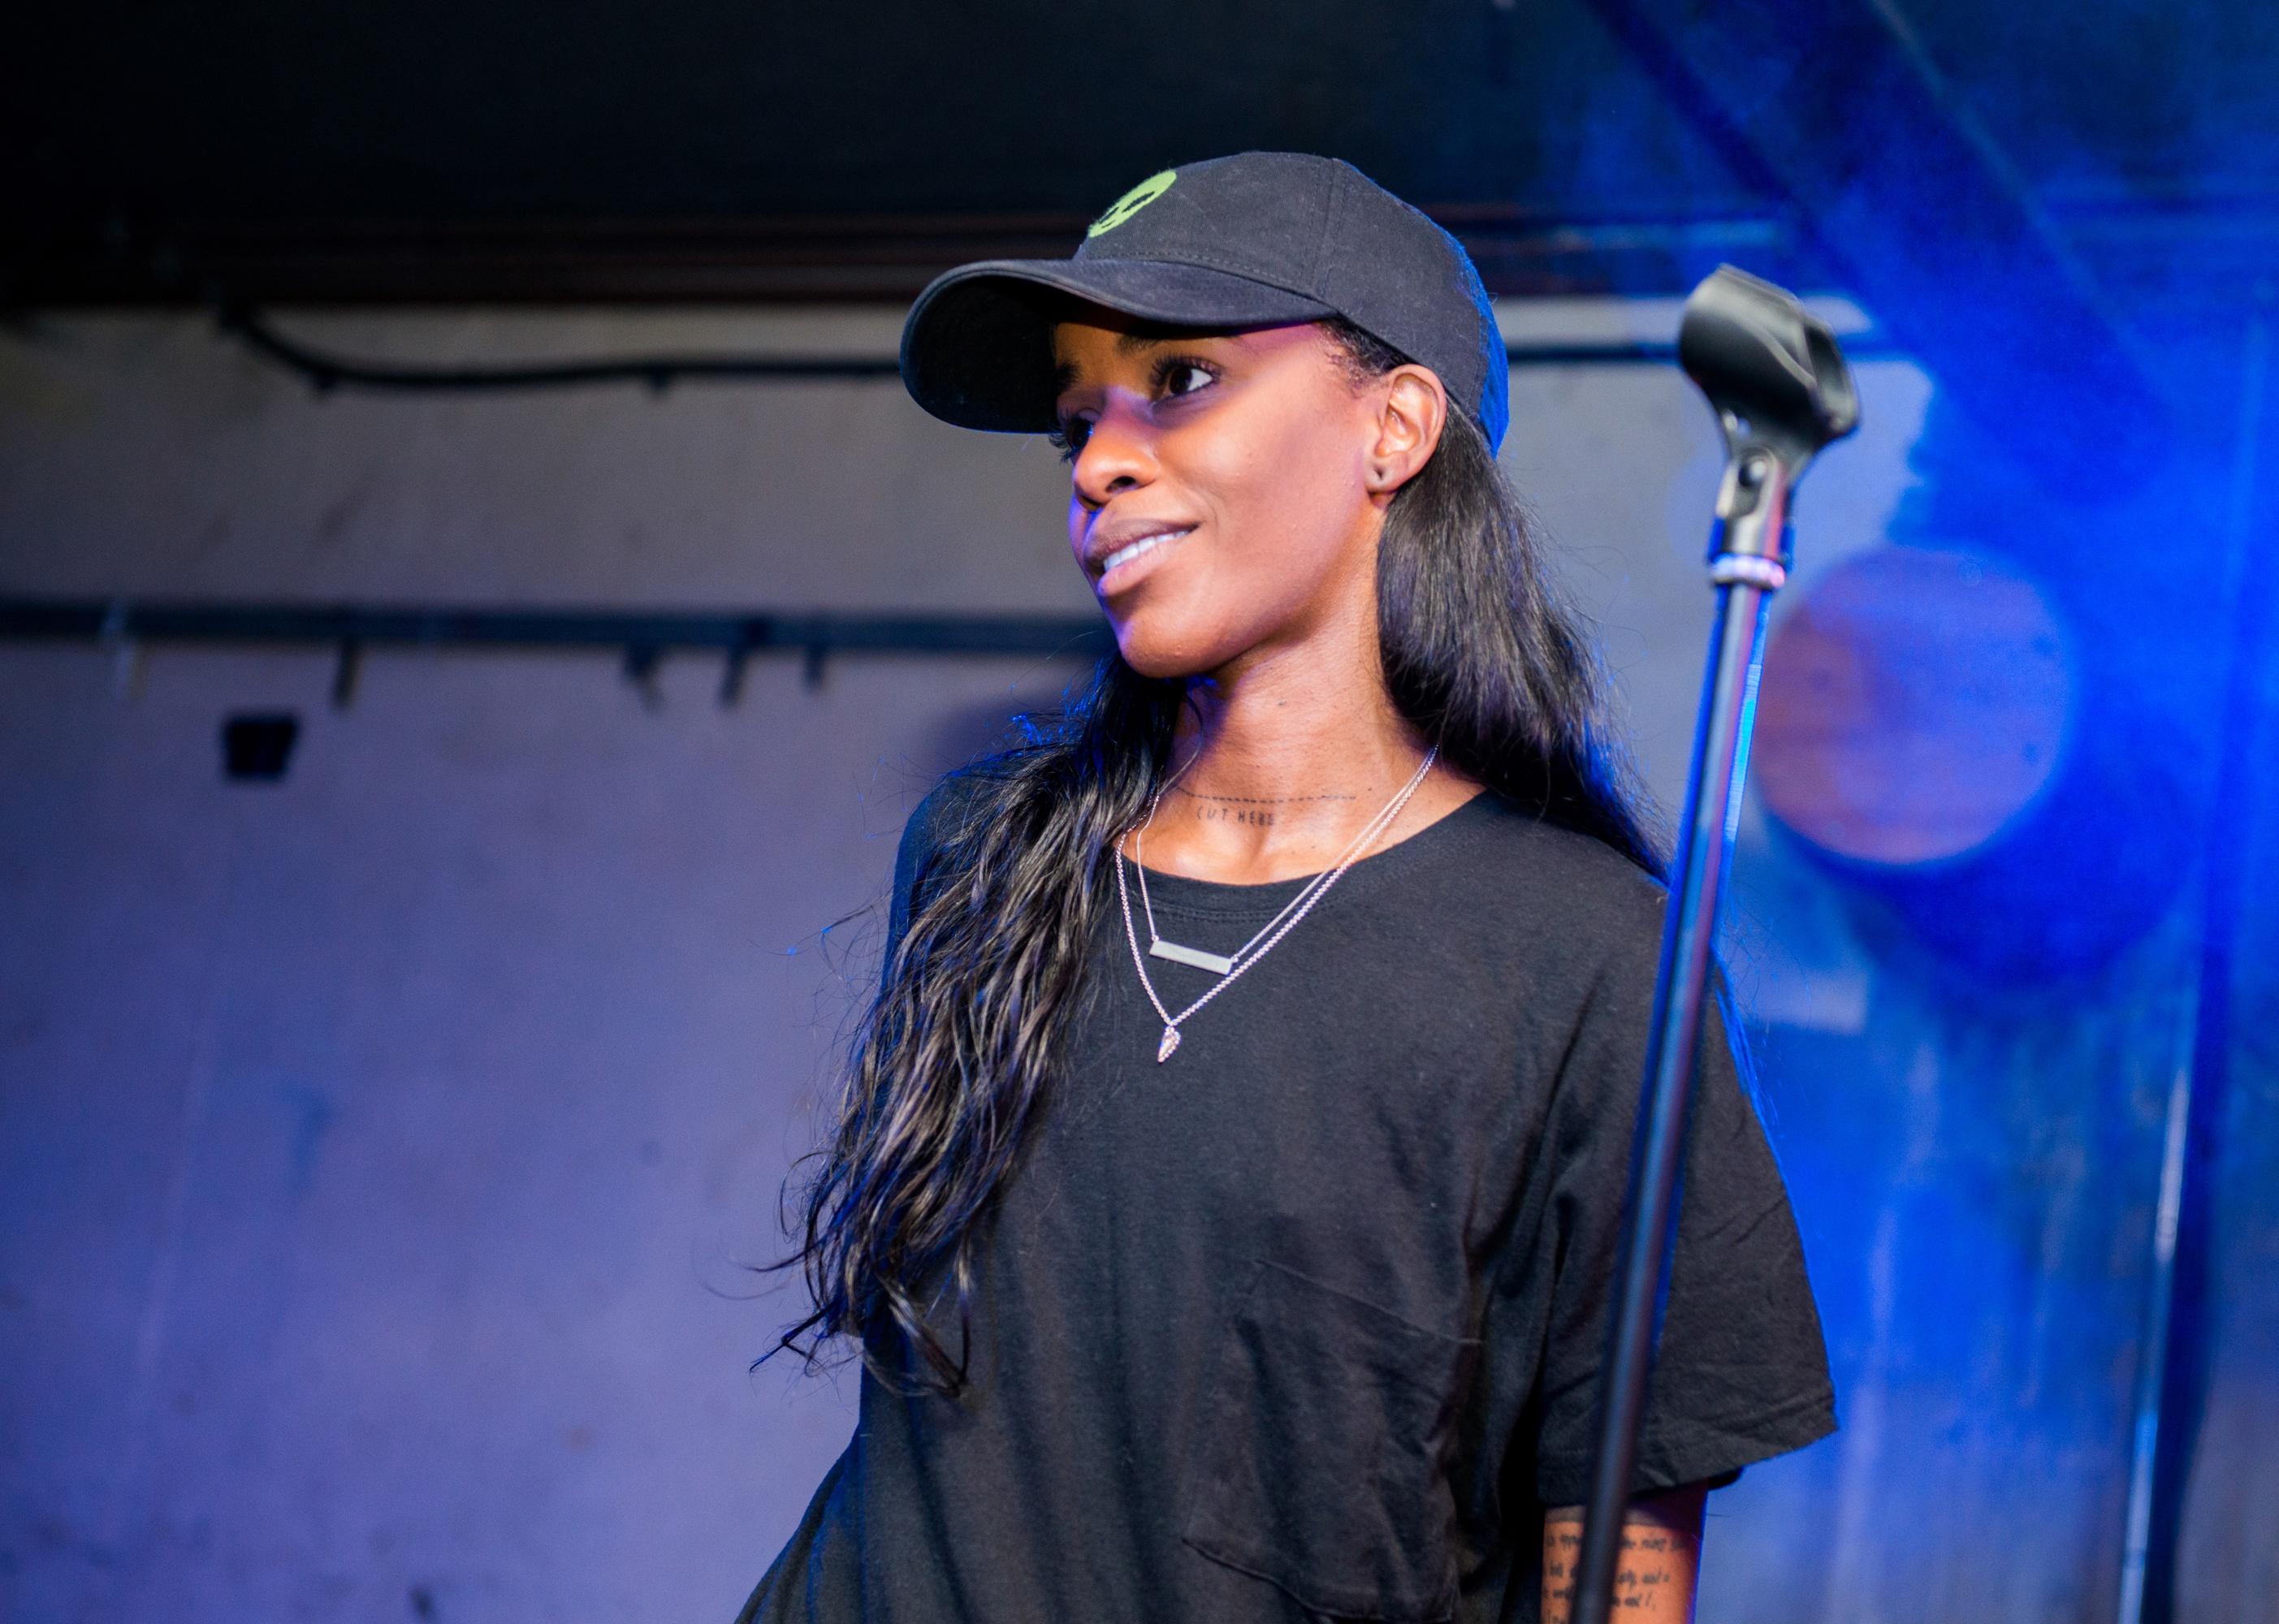 Angel Haze performs live at The Laundry.